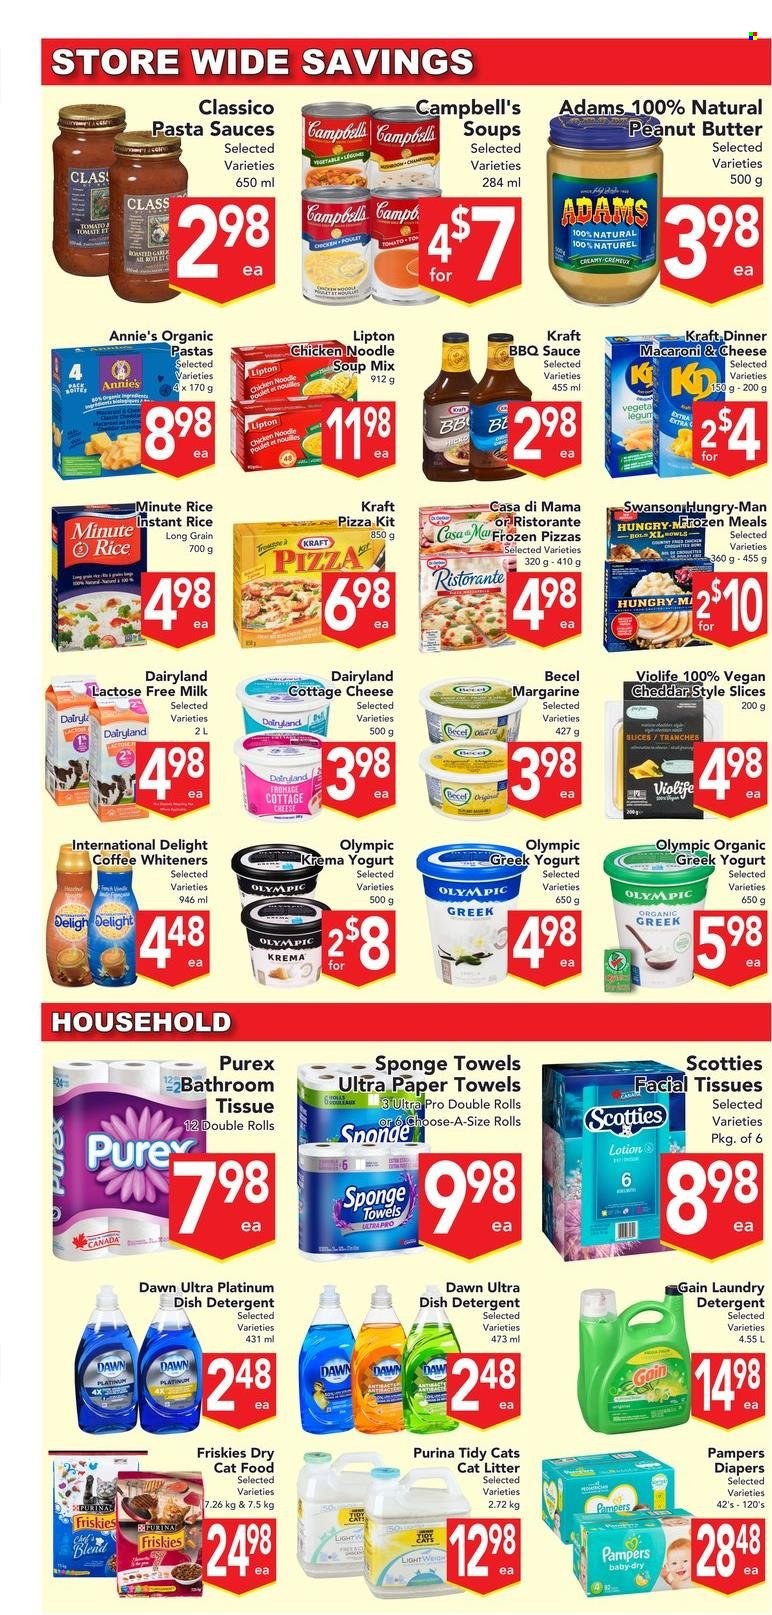 thumbnail - Buy-Low Foods Flyer - February 02, 2023 - February 08, 2023 - Sales products - Campbell's, macaroni & cheese, pizza, pasta sauce, soup mix, soup, pasta, noodles cup, noodles, Annie's, Kraft®, cottage cheese, greek yoghurt, yoghurt, milk, lactose free milk, margarine, rice, BBQ sauce, Classico, peanut butter, coffee, Pampers, nappies, kitchen towels, paper towels, Gain, laundry detergent, Purex, dishwasher cleaner, facial tissues, body lotion, animal food, cat food, Purina, dry cat food, Friskies, detergent, Lipton. Page 5.